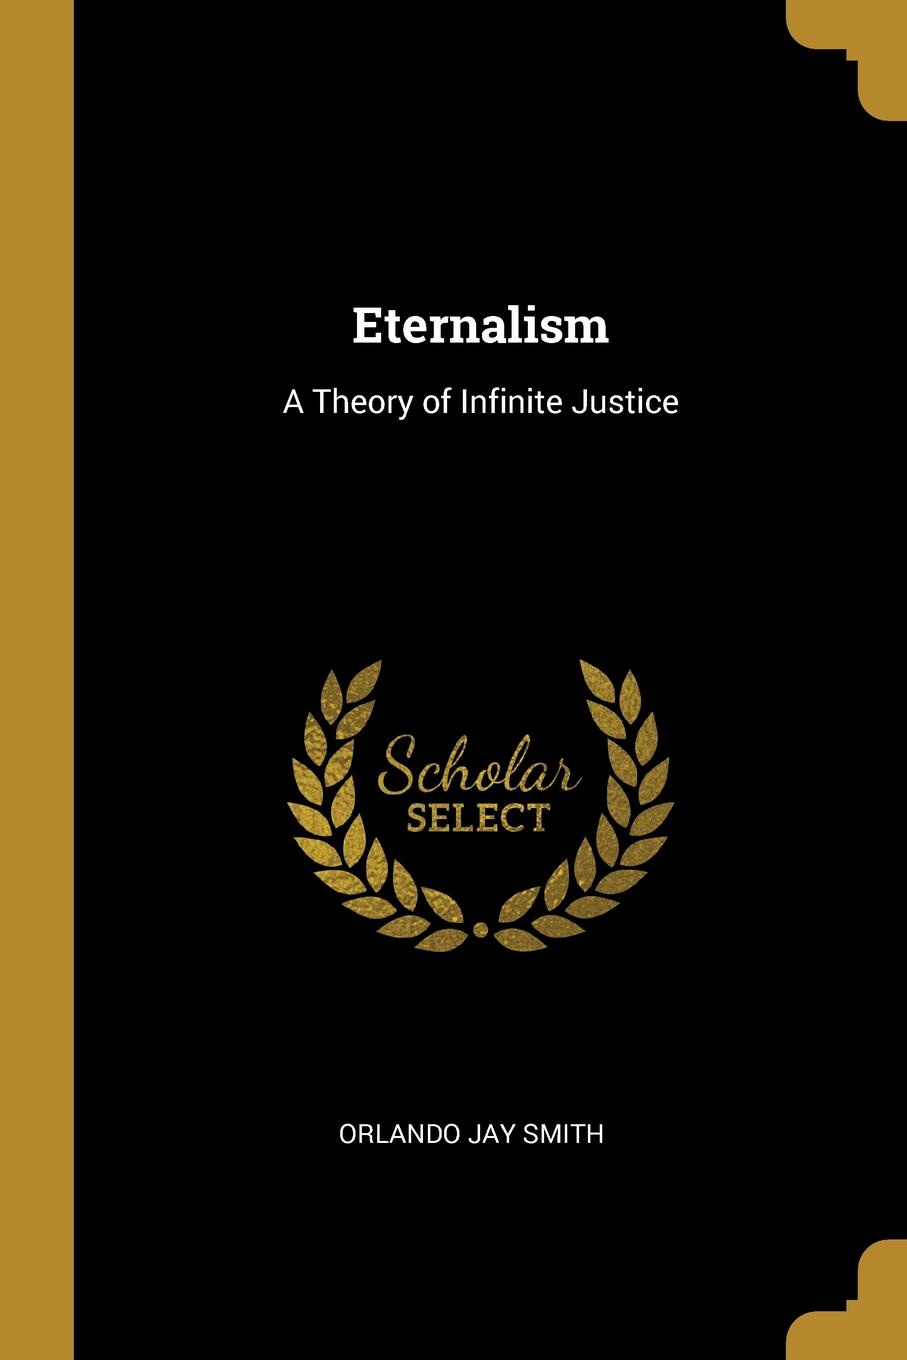 Eternalism. A Theory of Infinite Justice